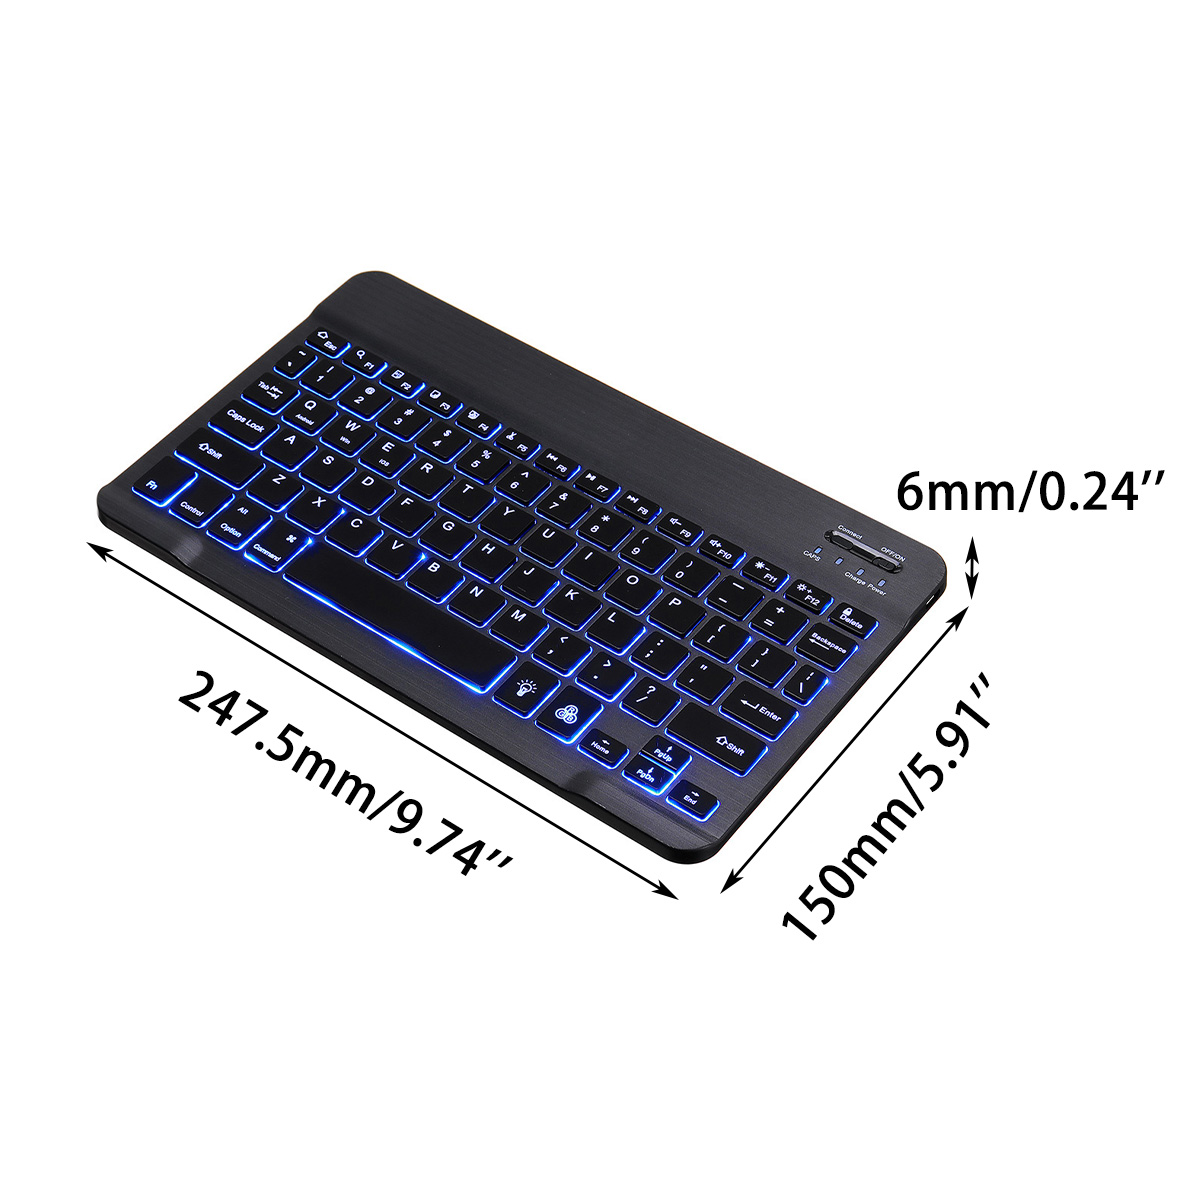 RGB-Backlight-Wireless-bluetooth-Keyboard-for-Android-IOS-and-Windows-Tablet-1960970-7